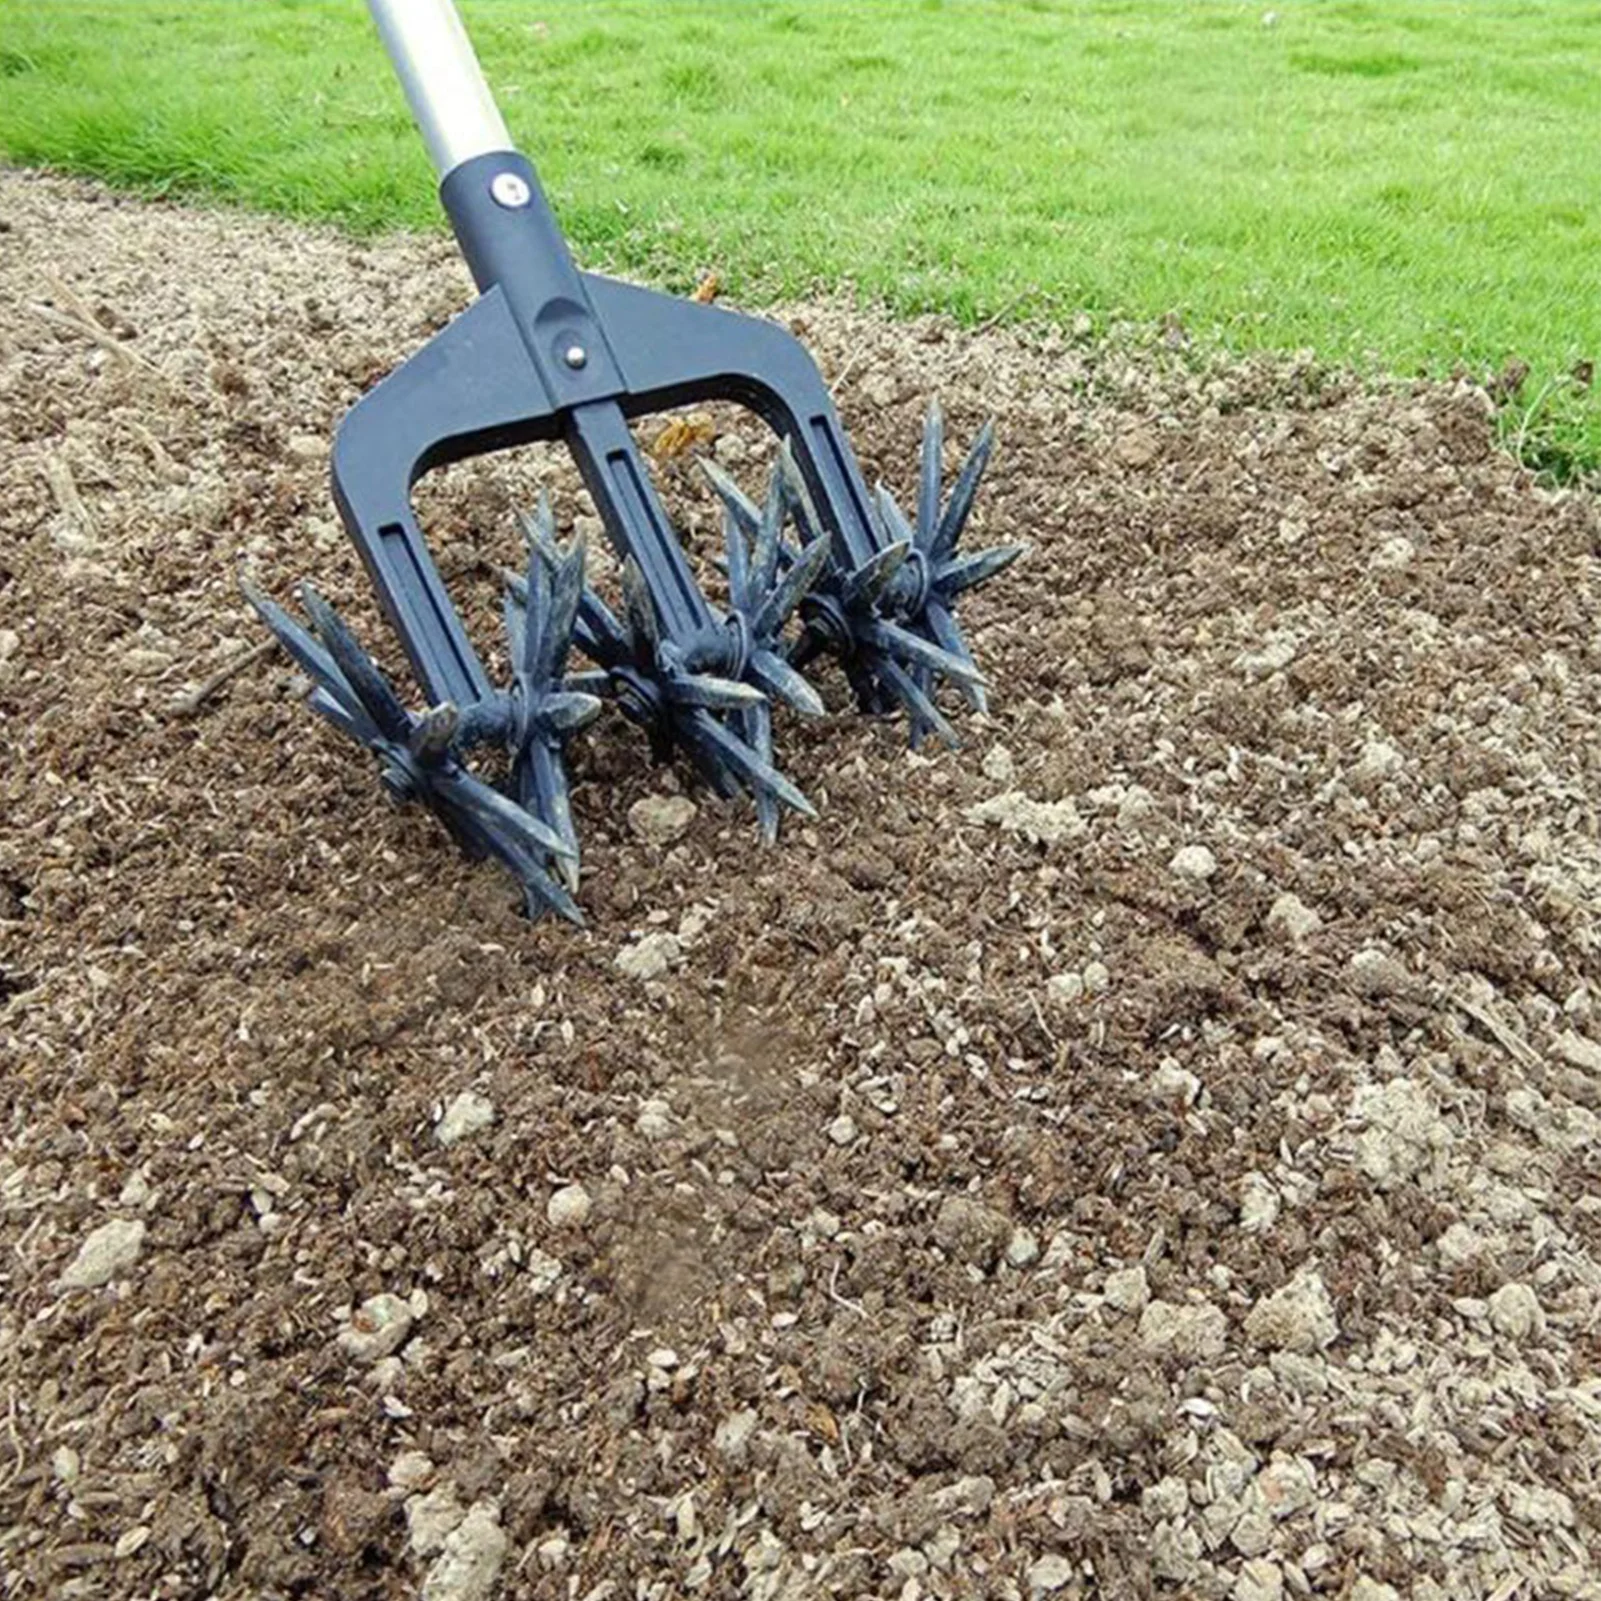 

Garden Rotary Tiller Grass Repair And Seed Planting Tool Labor-saving Rotary Cultivator Soil Turning Tool Cultivate Easily